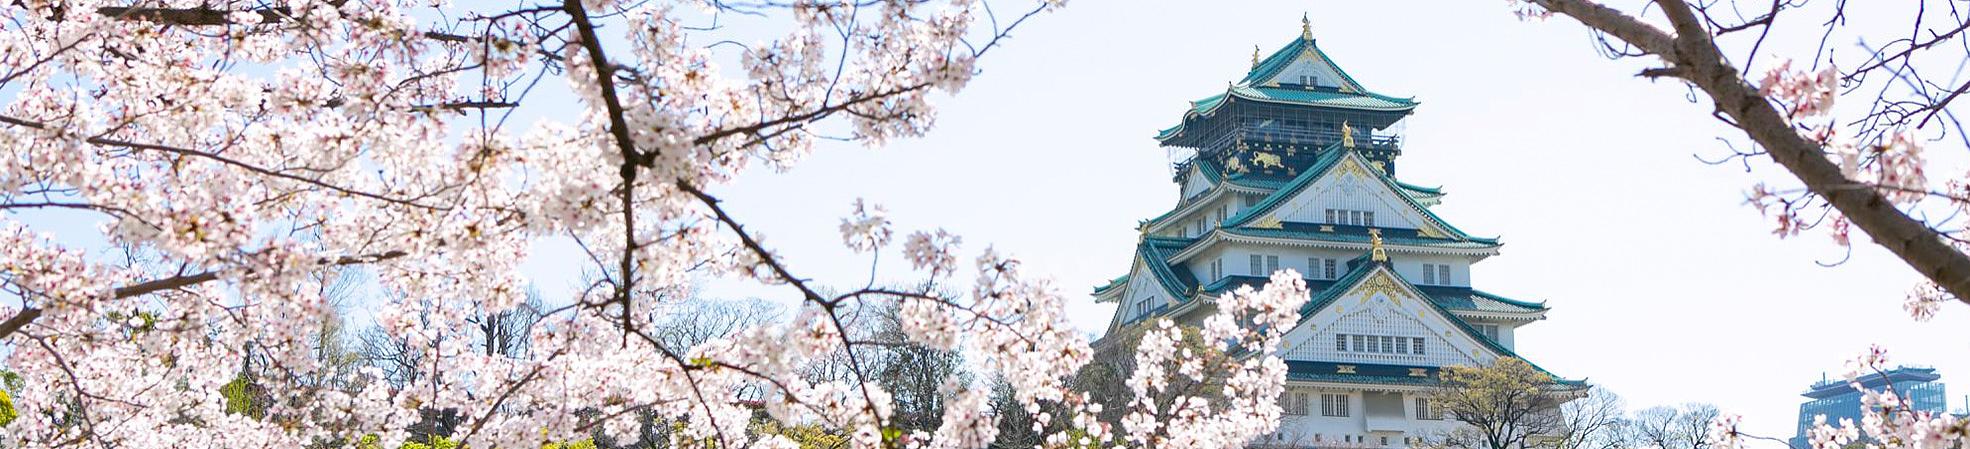 Osaka Castle with Cherry Blossoms